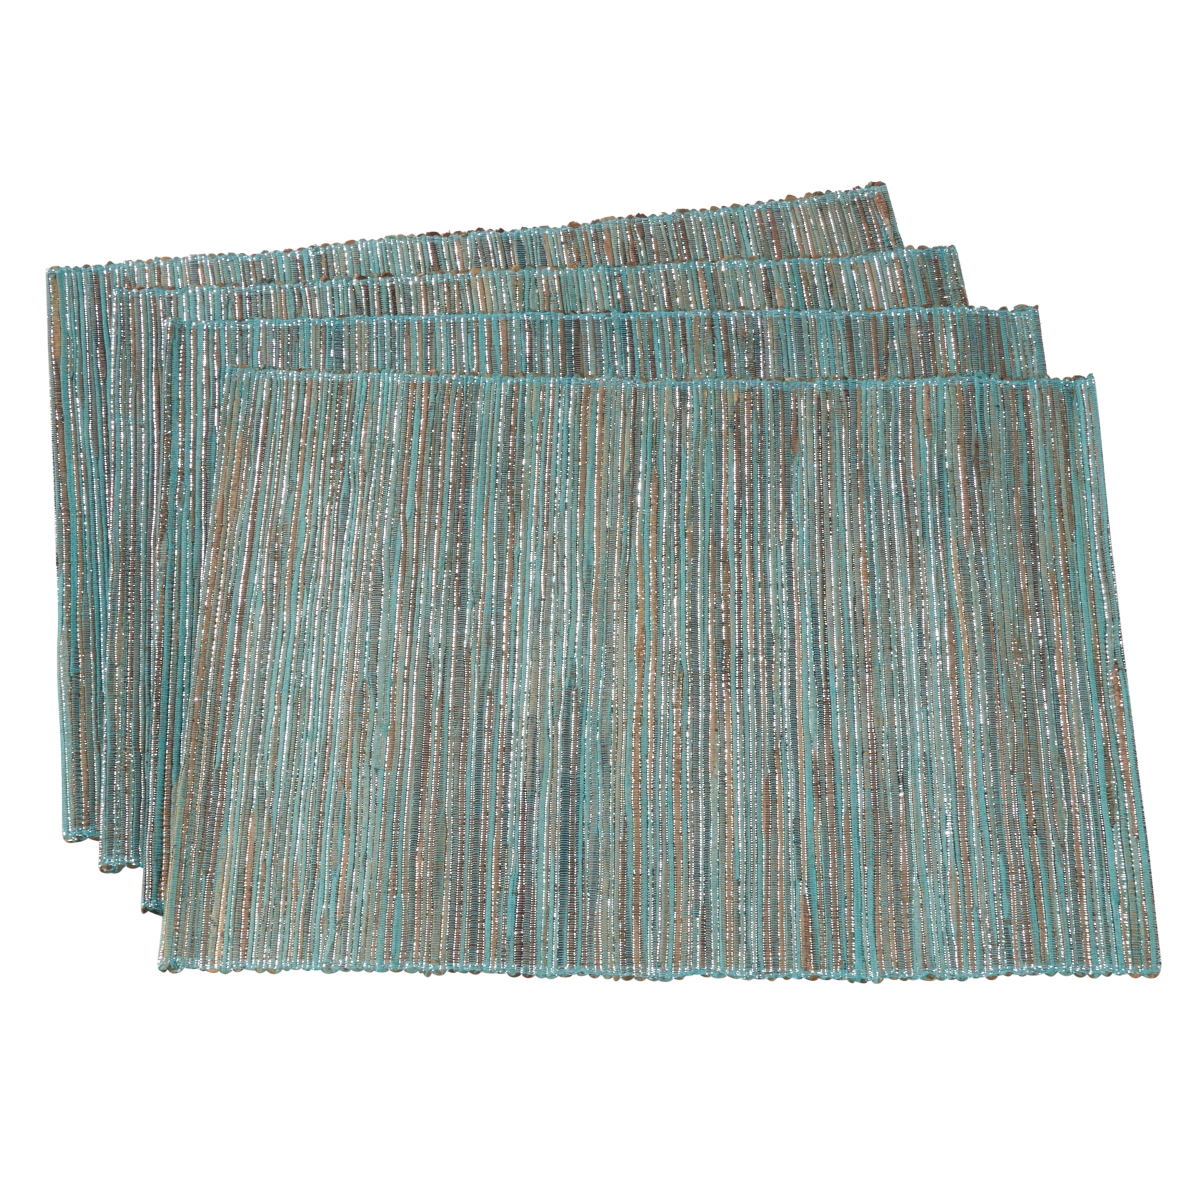 Picture of SARO 217.TQ1420B Shimmering Woven Nubby Water Hyacinth Placemat  Turquoise - Set of 4